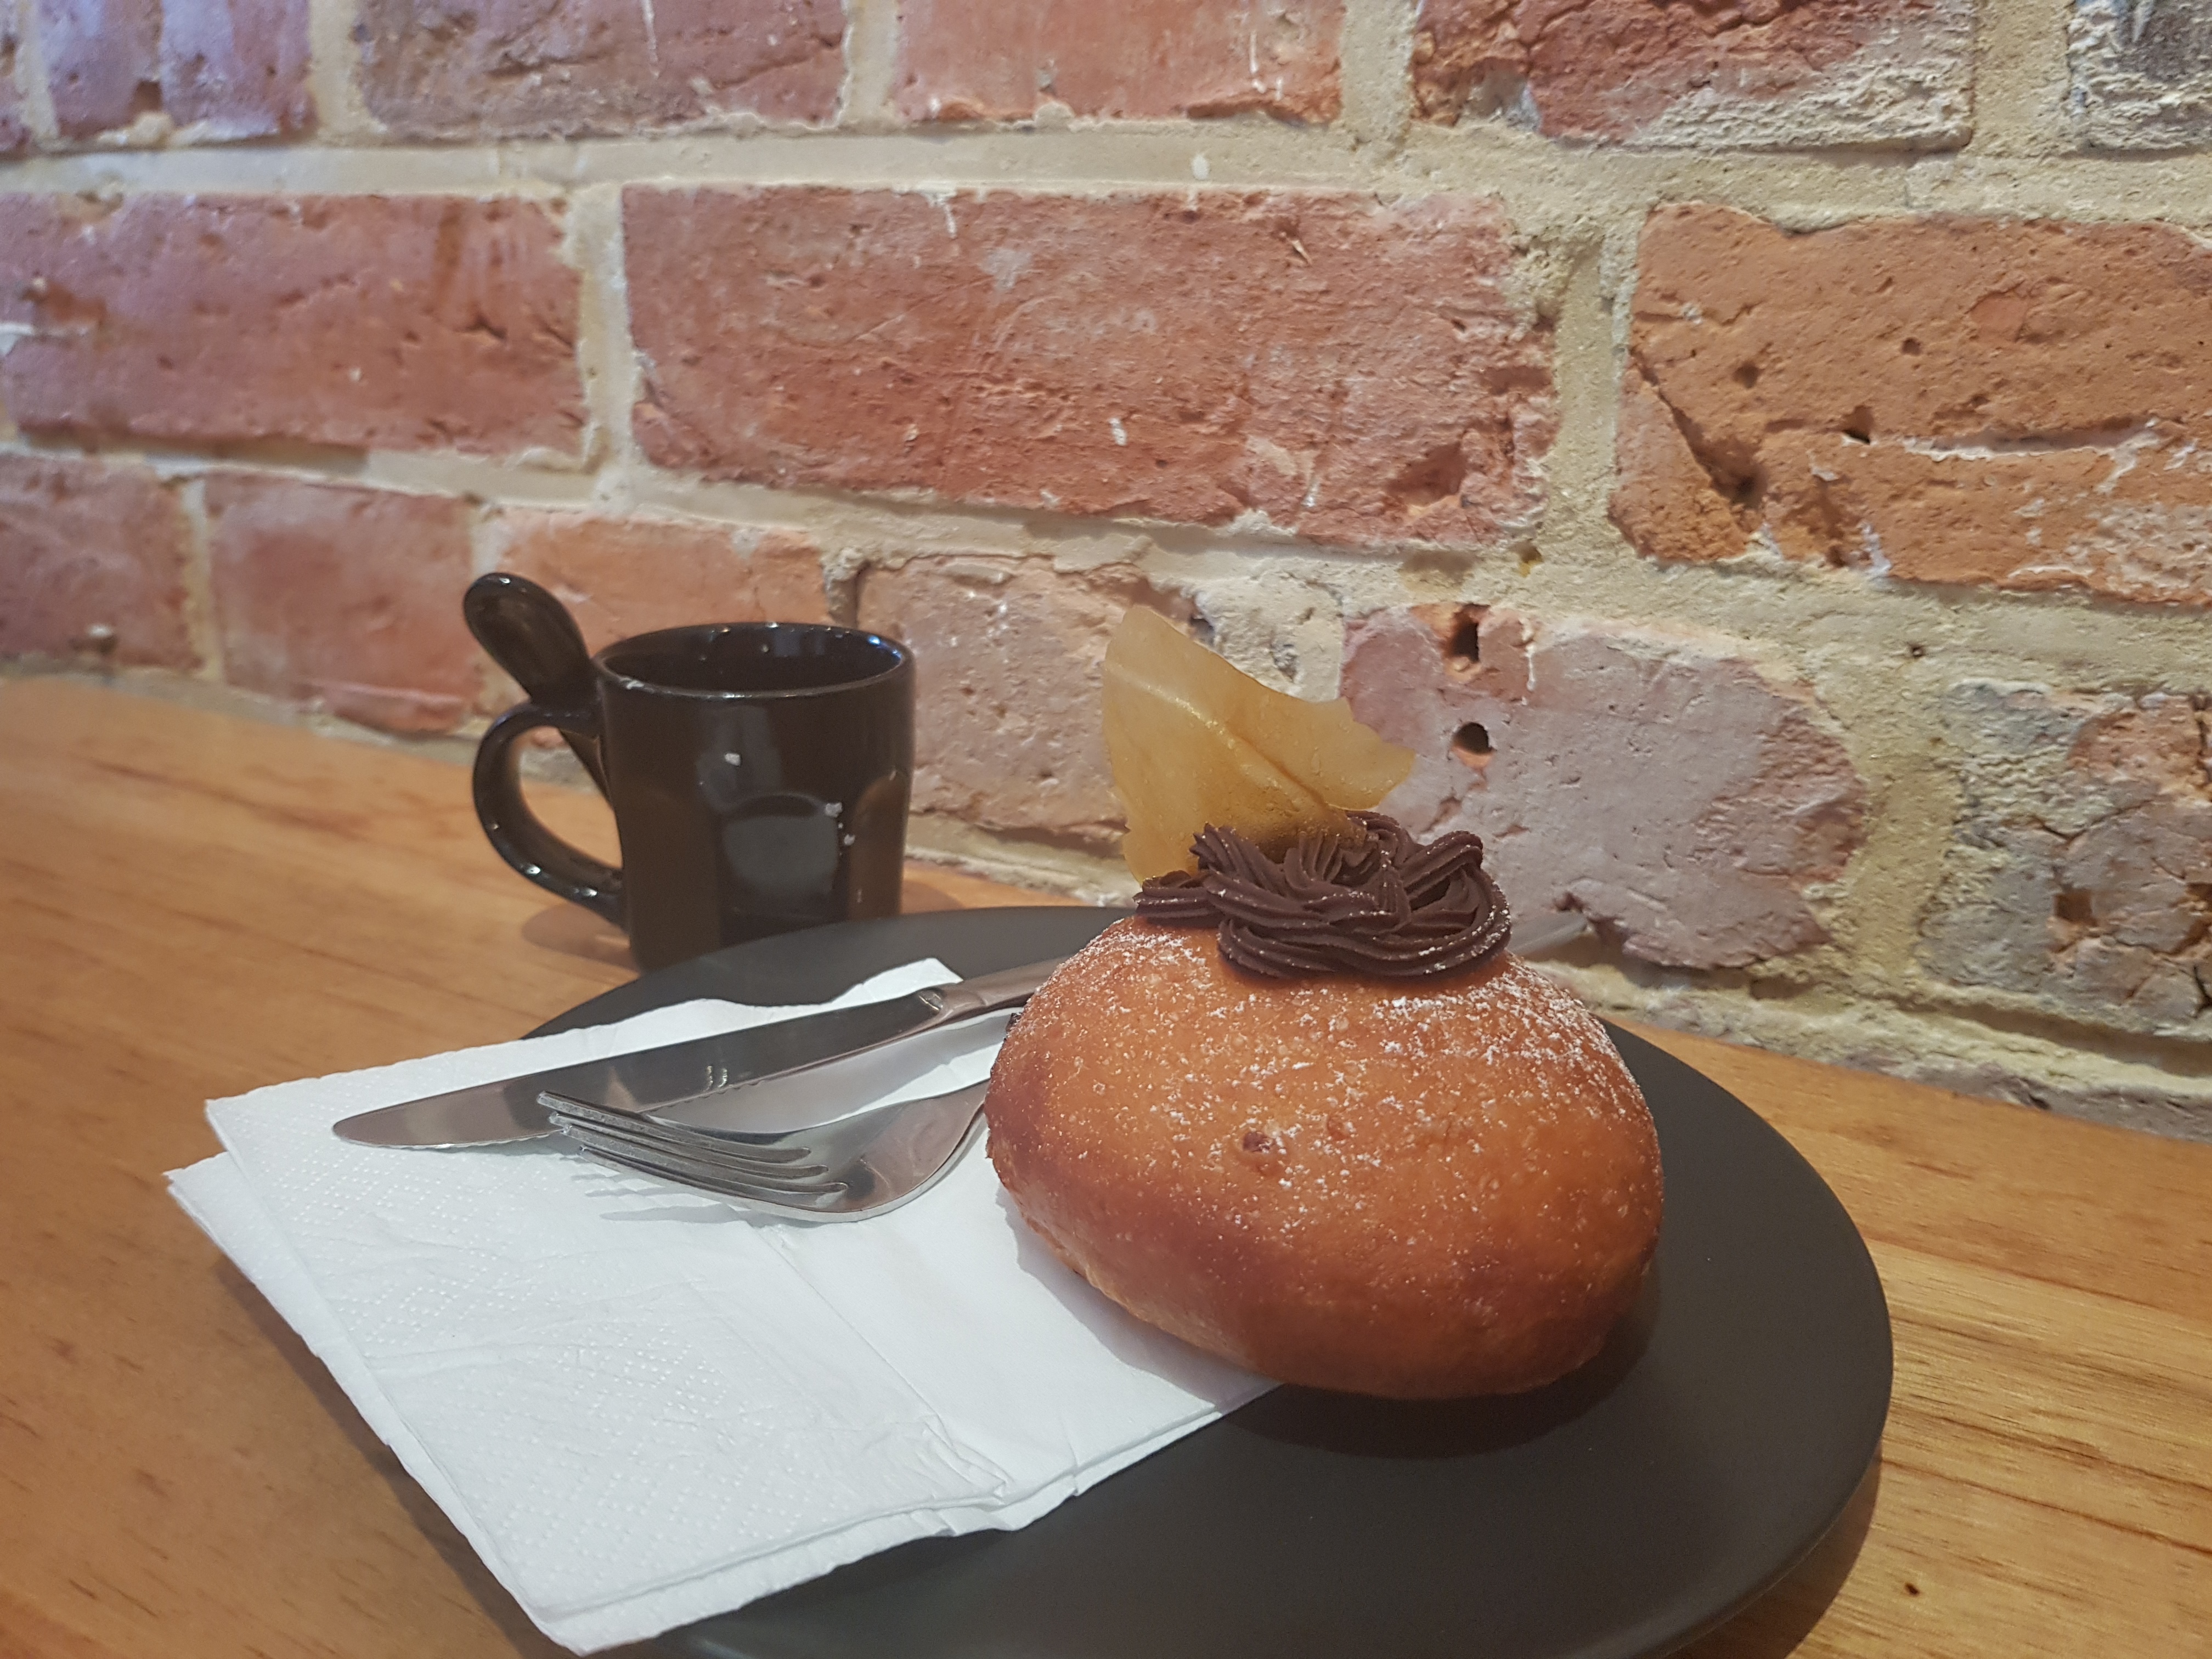 A nicely decorated donut on a black plate.